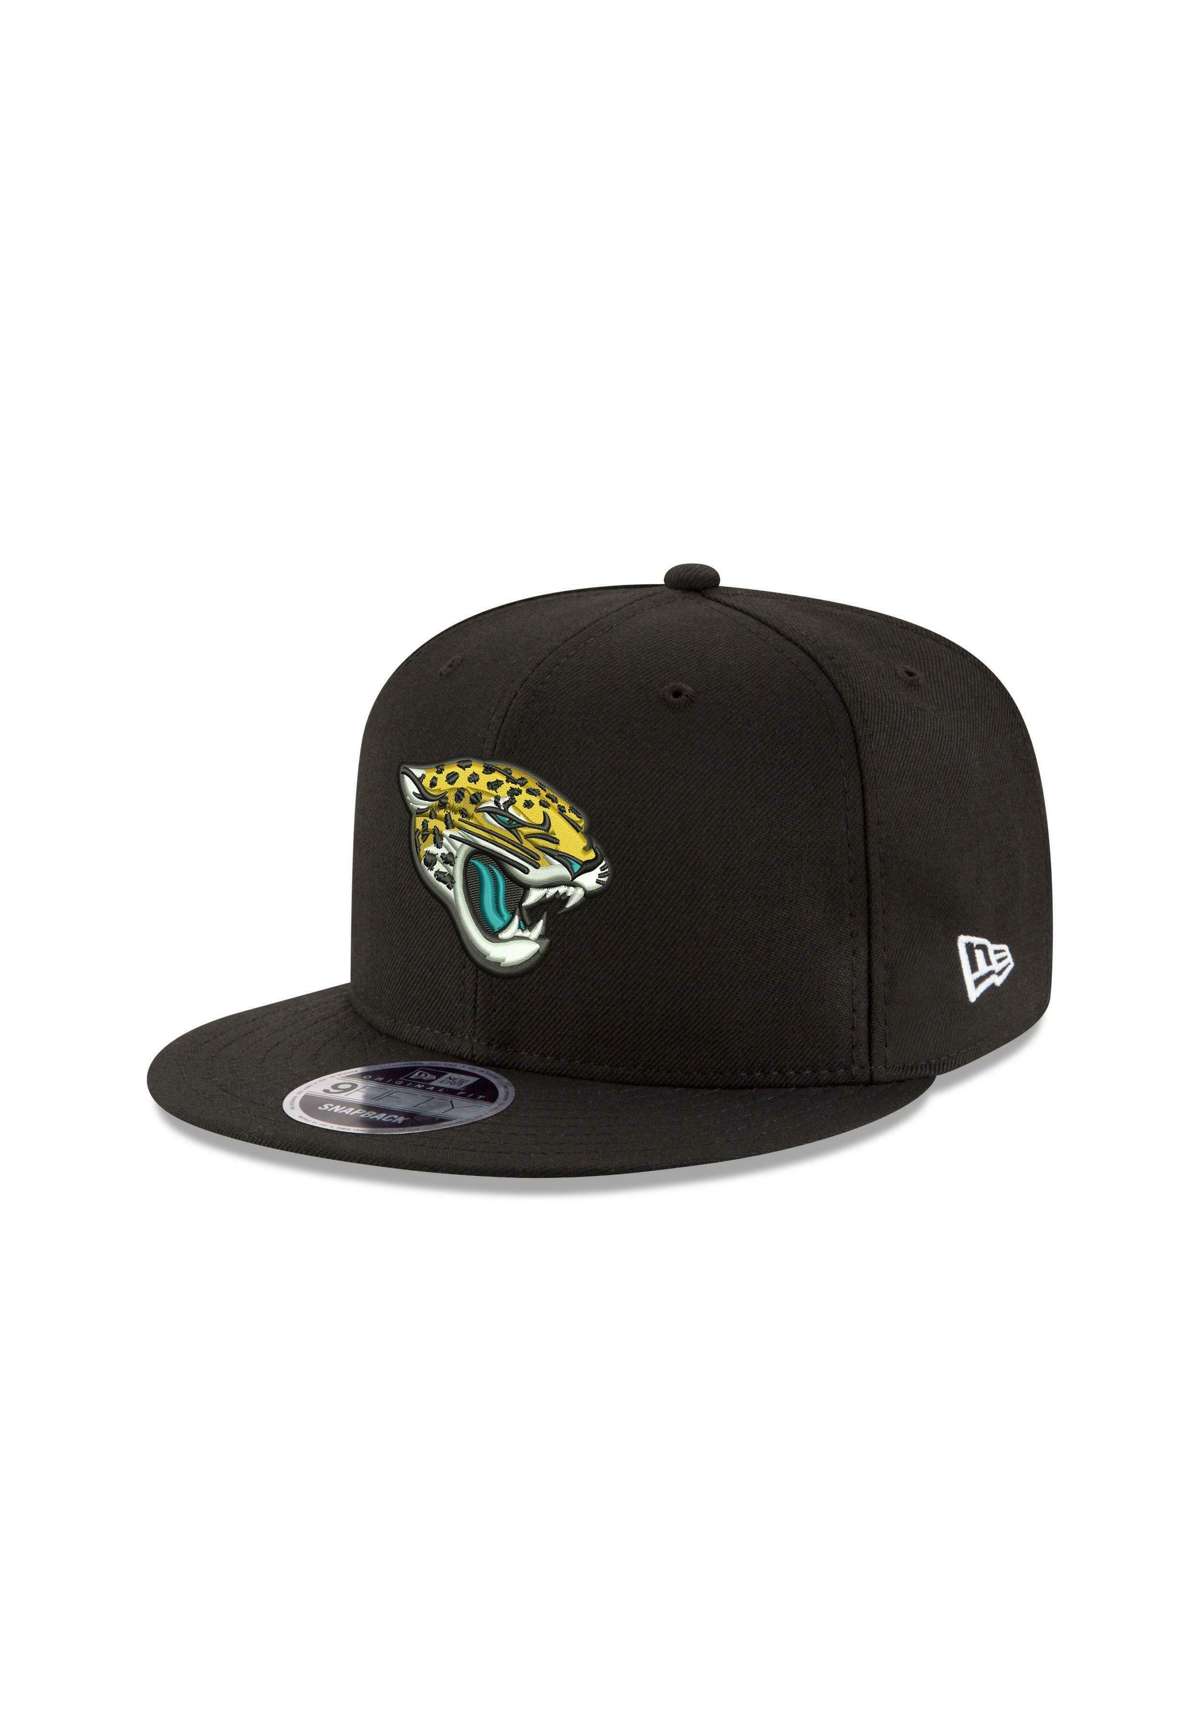 Кепка JACKSONVILLE JAGUARS FIRST COLOUR BASE 9FIFTY SNAPBACK CAP NEW E